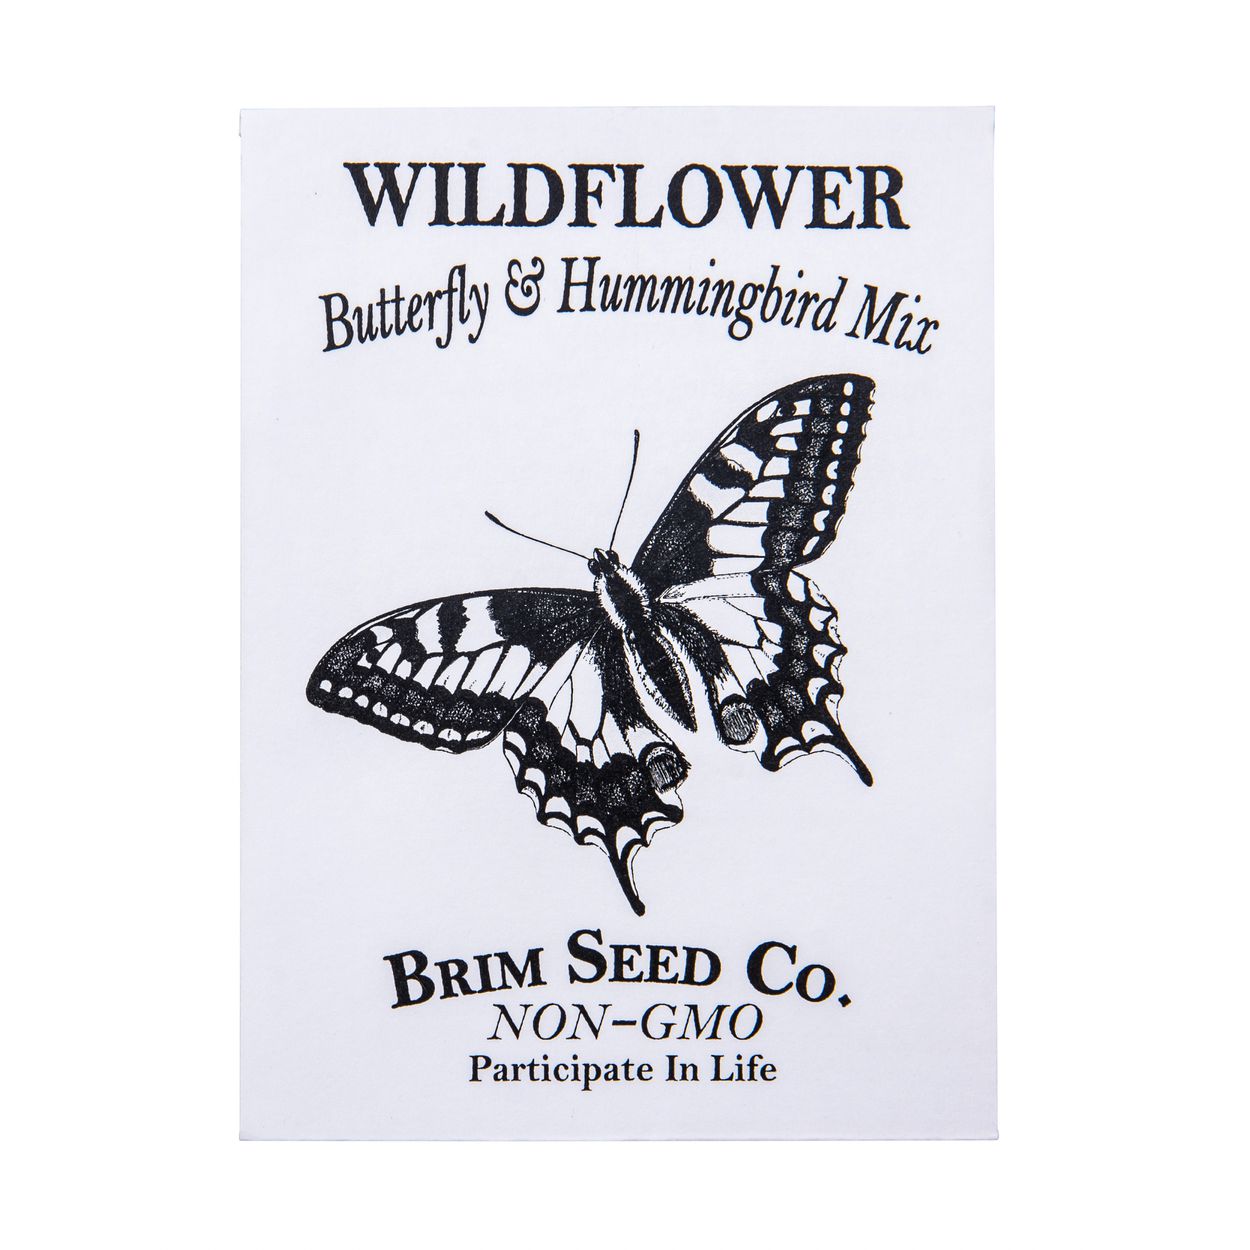 Brim Seed Co. - Butterfly & Hummingbird Mix Wildflower Seed